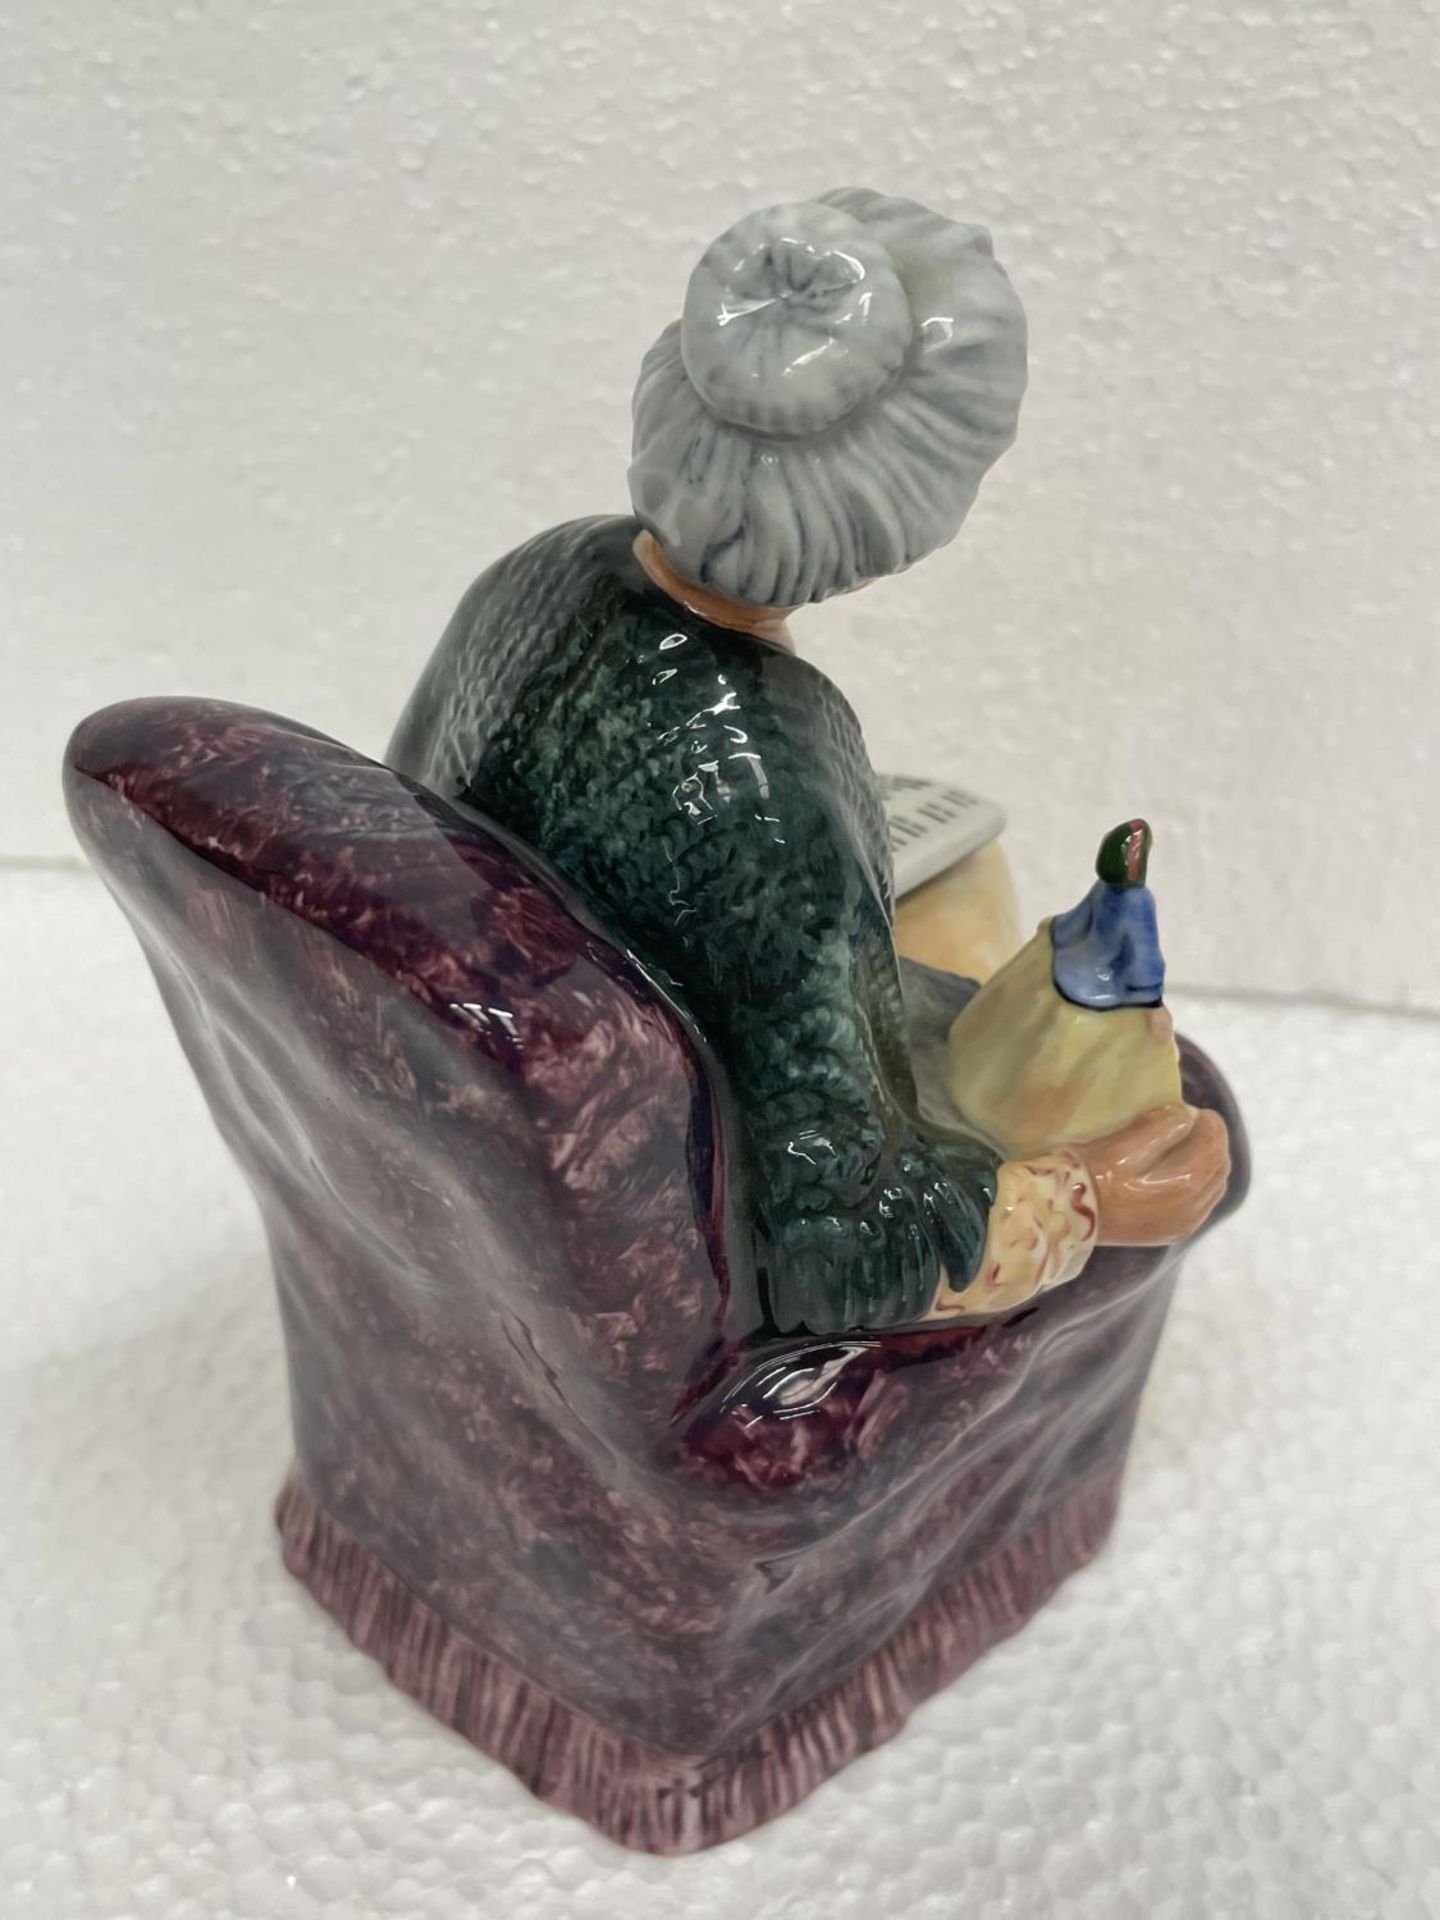 A ROYAL DOULTON FIGURE PRIZED POSSESSIONS HN2942 MADE EXCLUSIVELY FOR THE COLLECTORS CLUB - Image 3 of 5